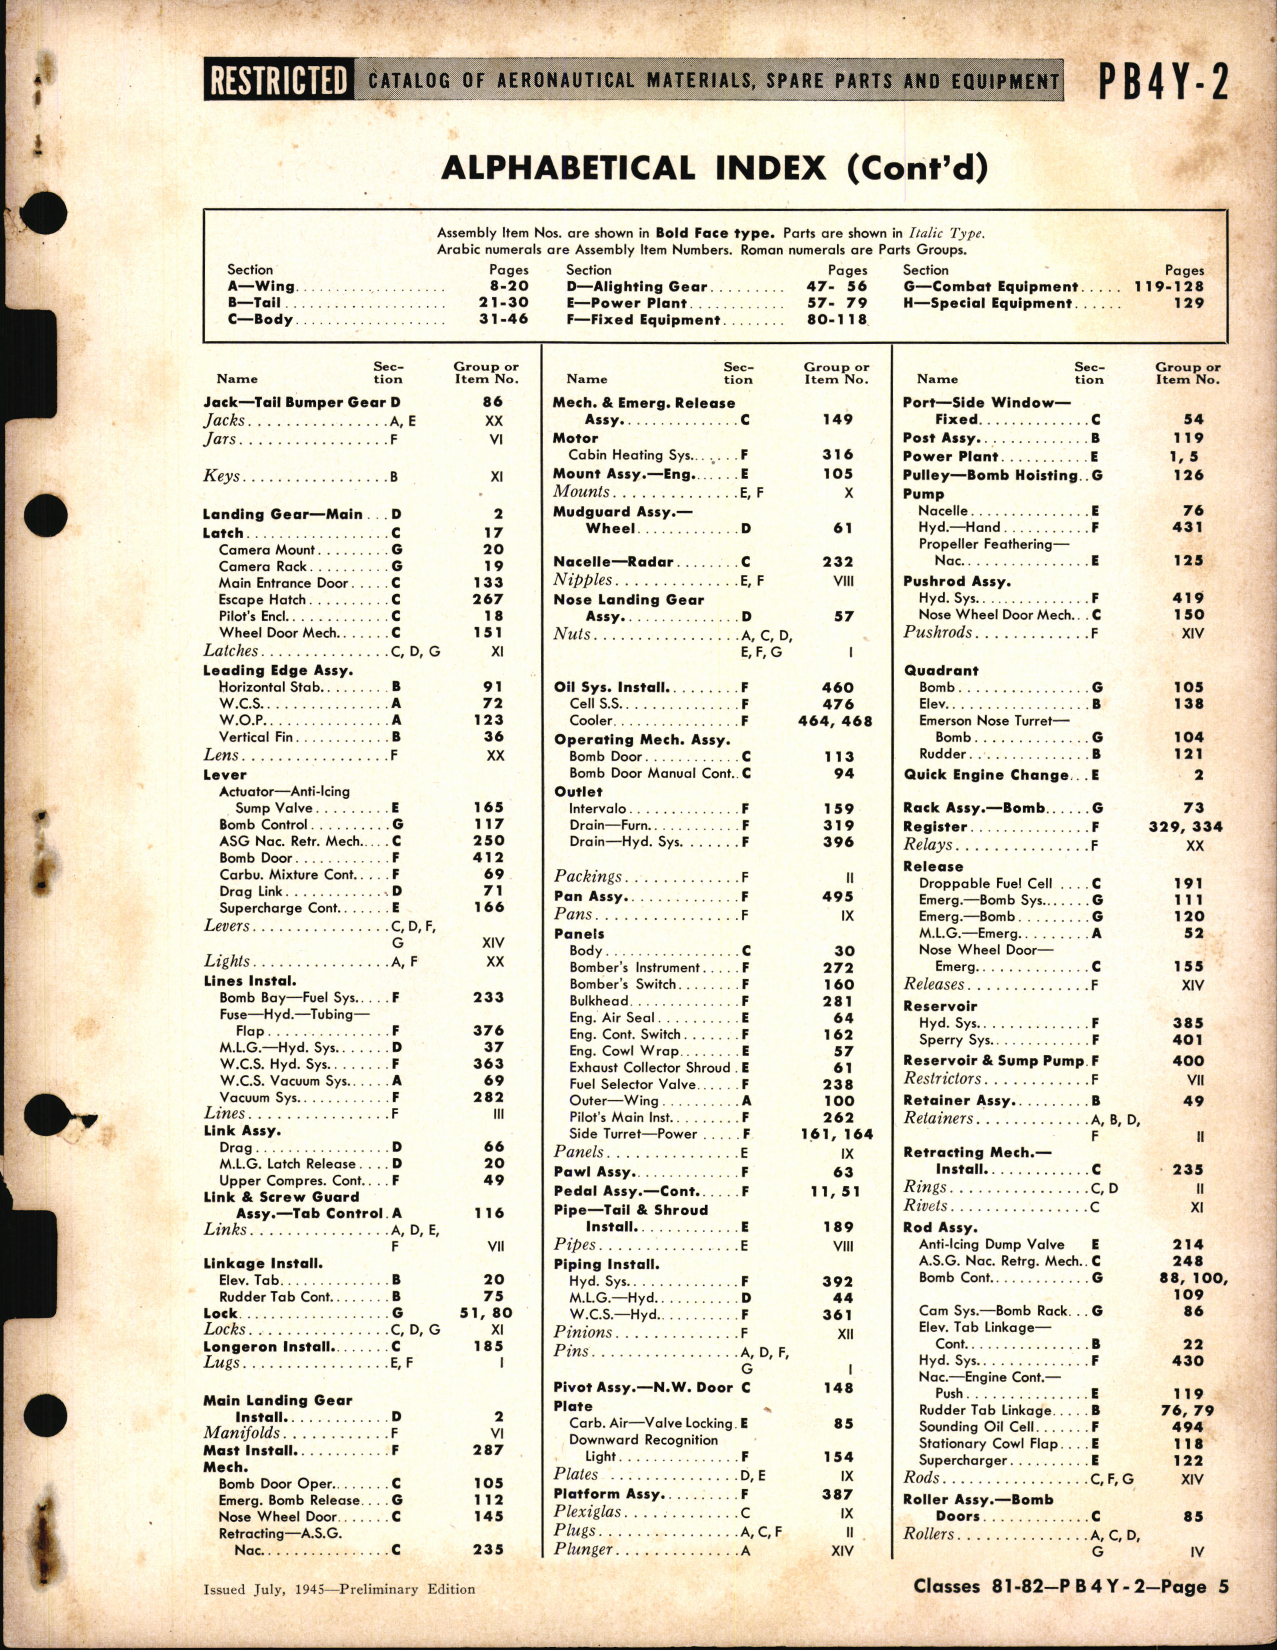 Sample page 5 from AirCorps Library document: PB4Y-2 Privateer Availability List and Spare Parts